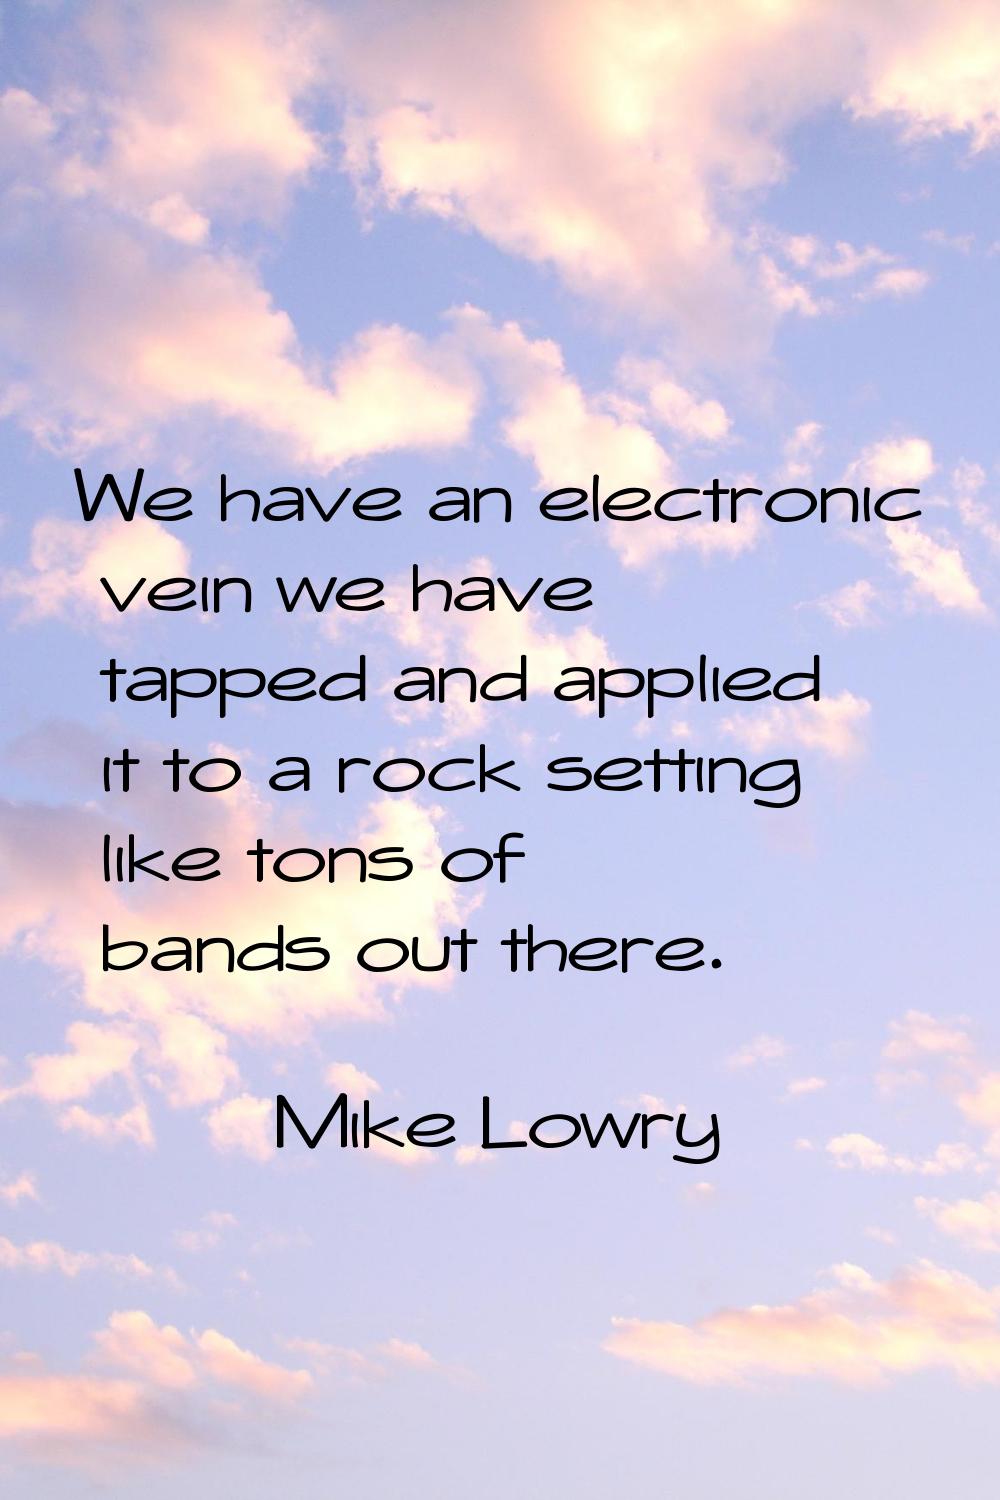 We have an electronic vein we have tapped and applied it to a rock setting like tons of bands out t